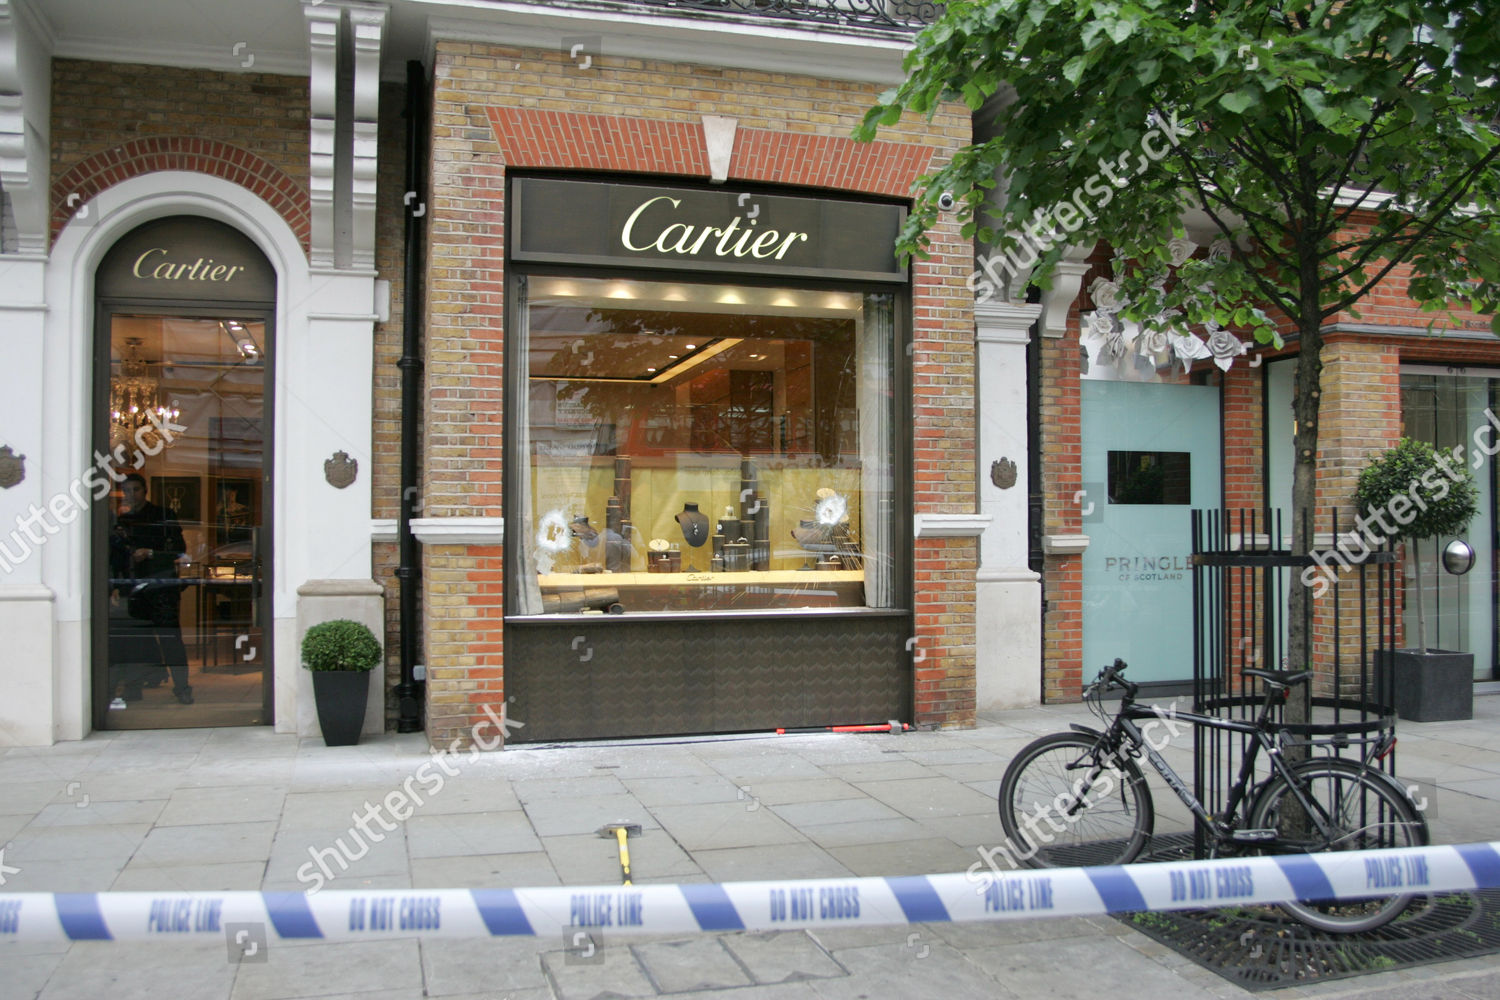 scene outside Cartier after thieves 